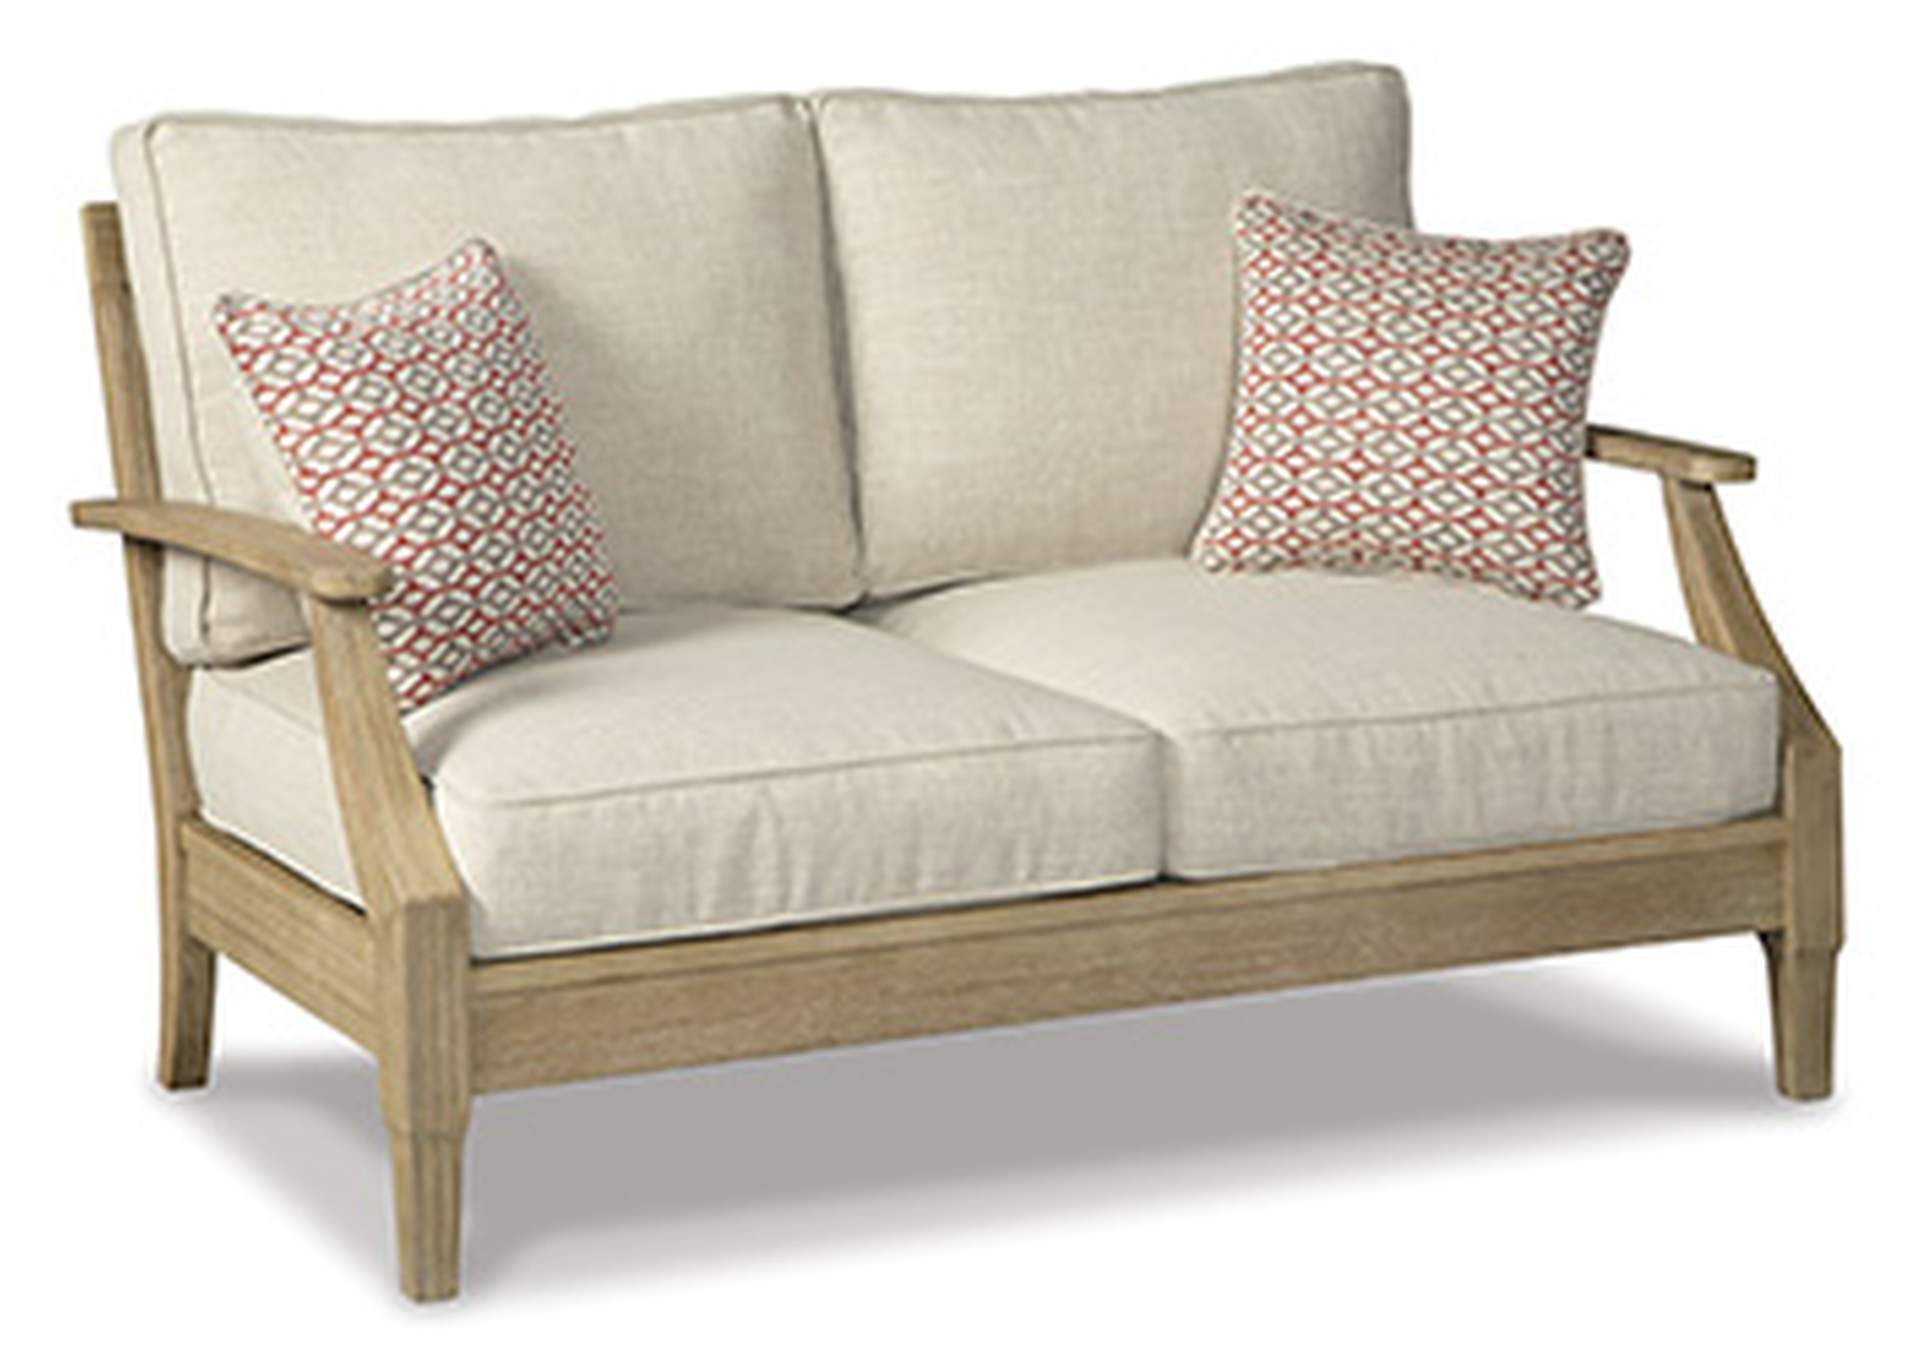 Clare View Loveseat with Cushion,Outdoor By Ashley